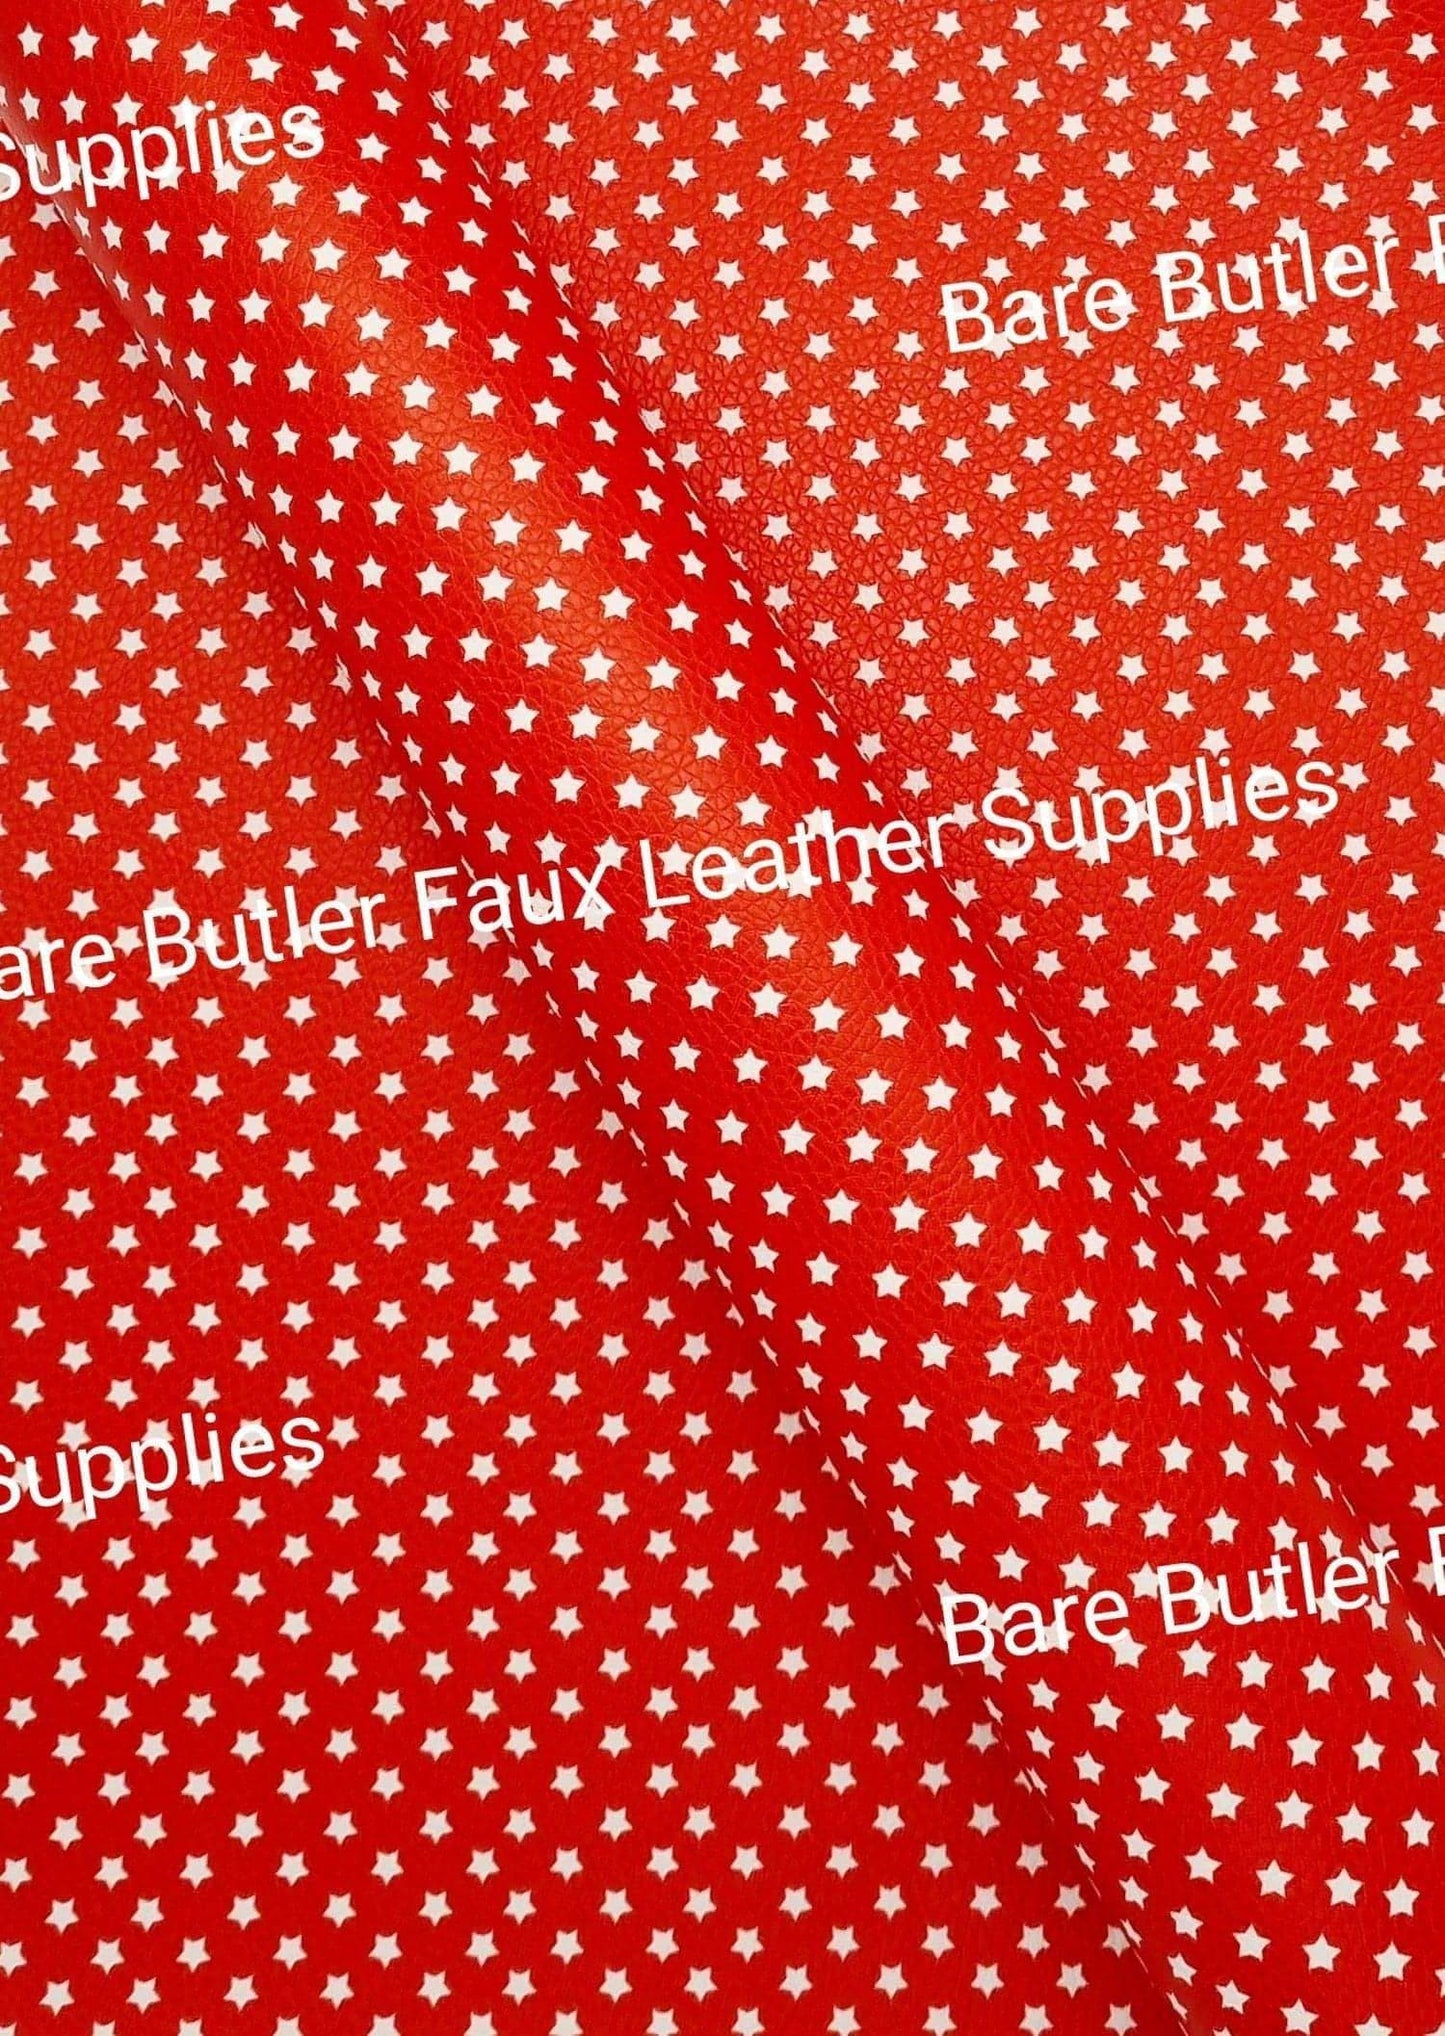 Red & White Stars Litchi - Fabric, Faux, Faux Leather, Leather, leatherette, Litchi - Bare Butler Faux Leather Supplies 